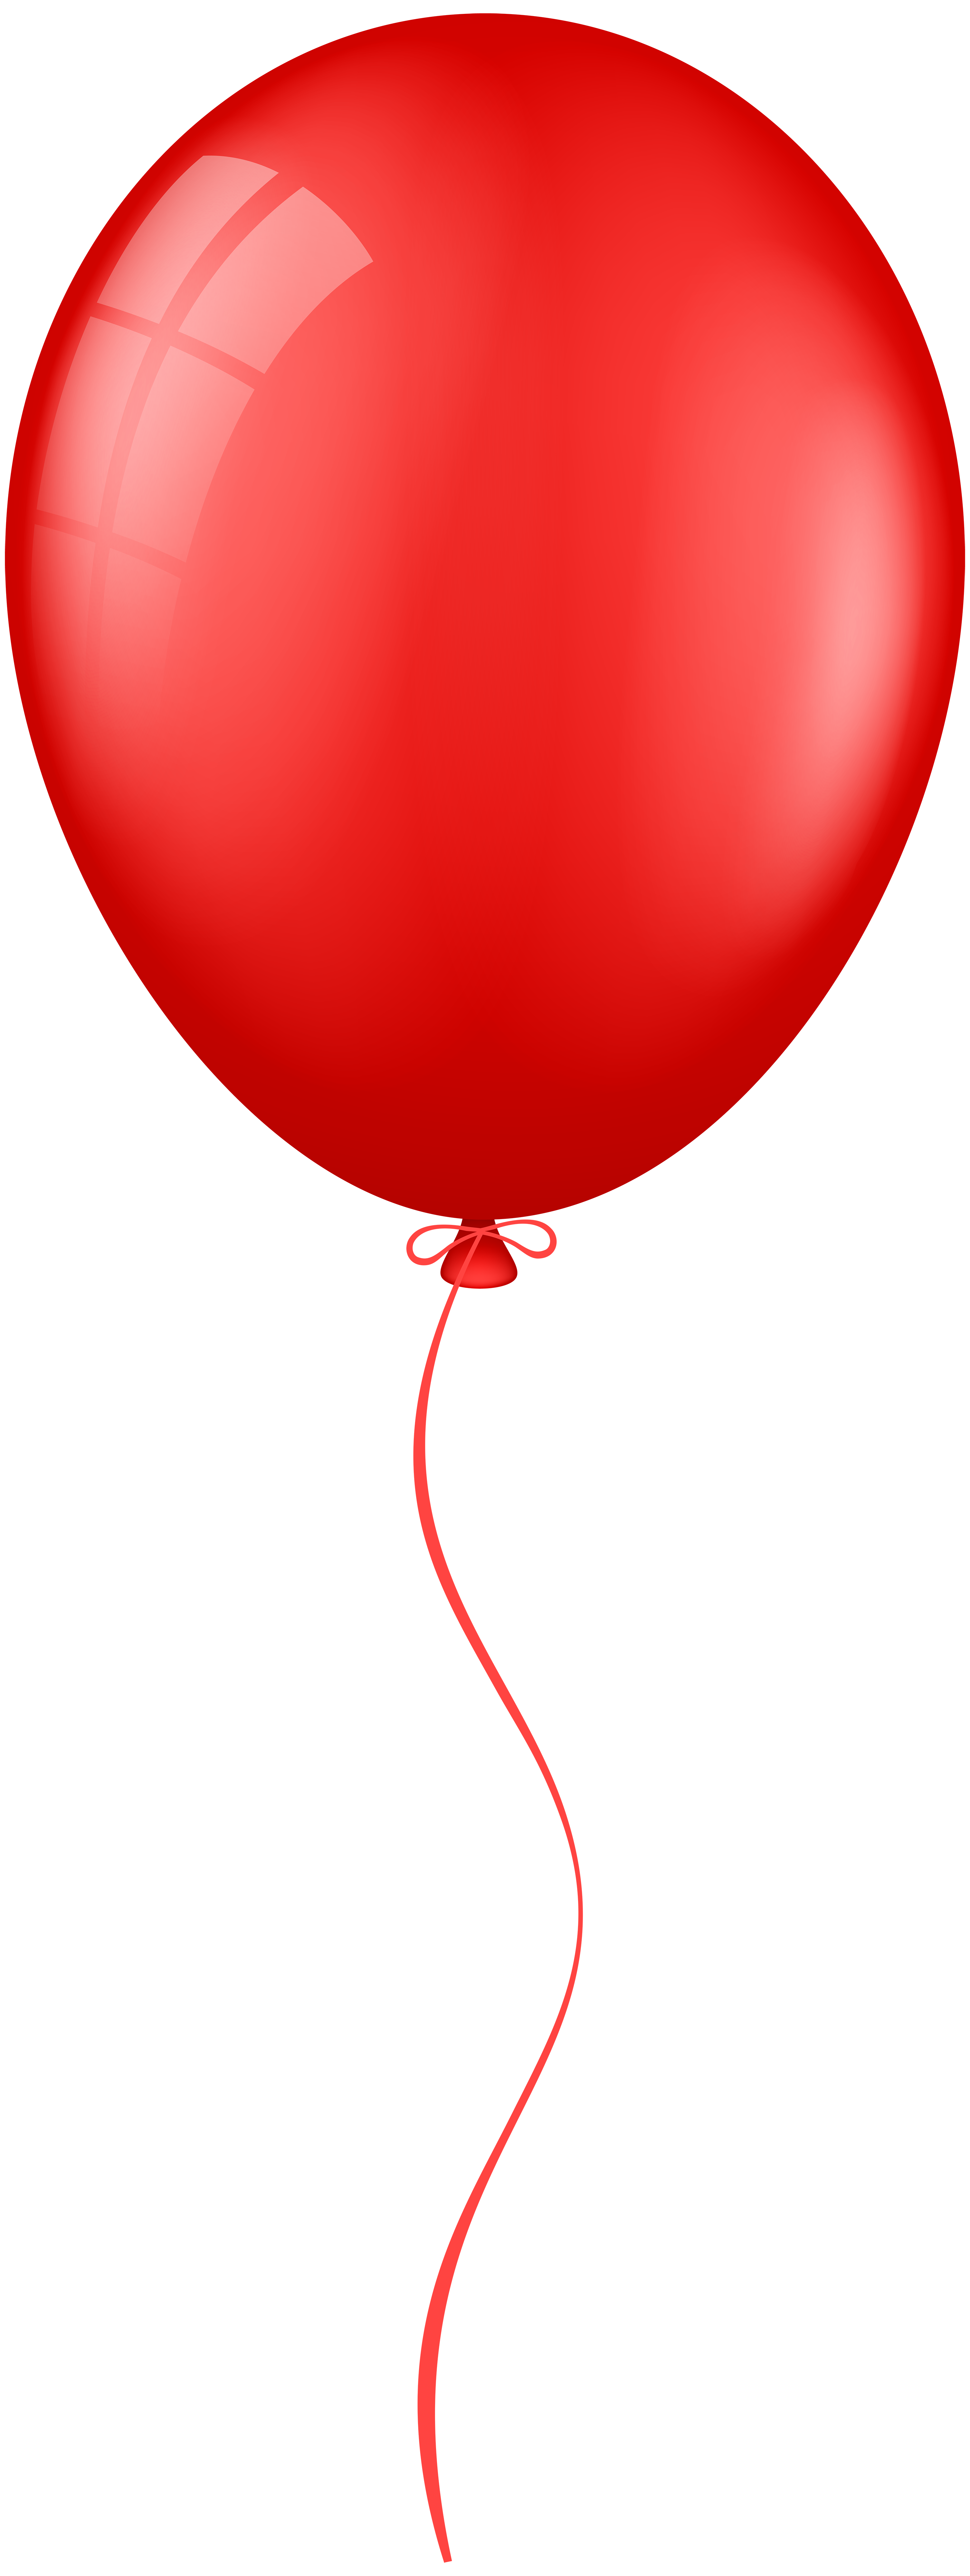 Red balloon clipart